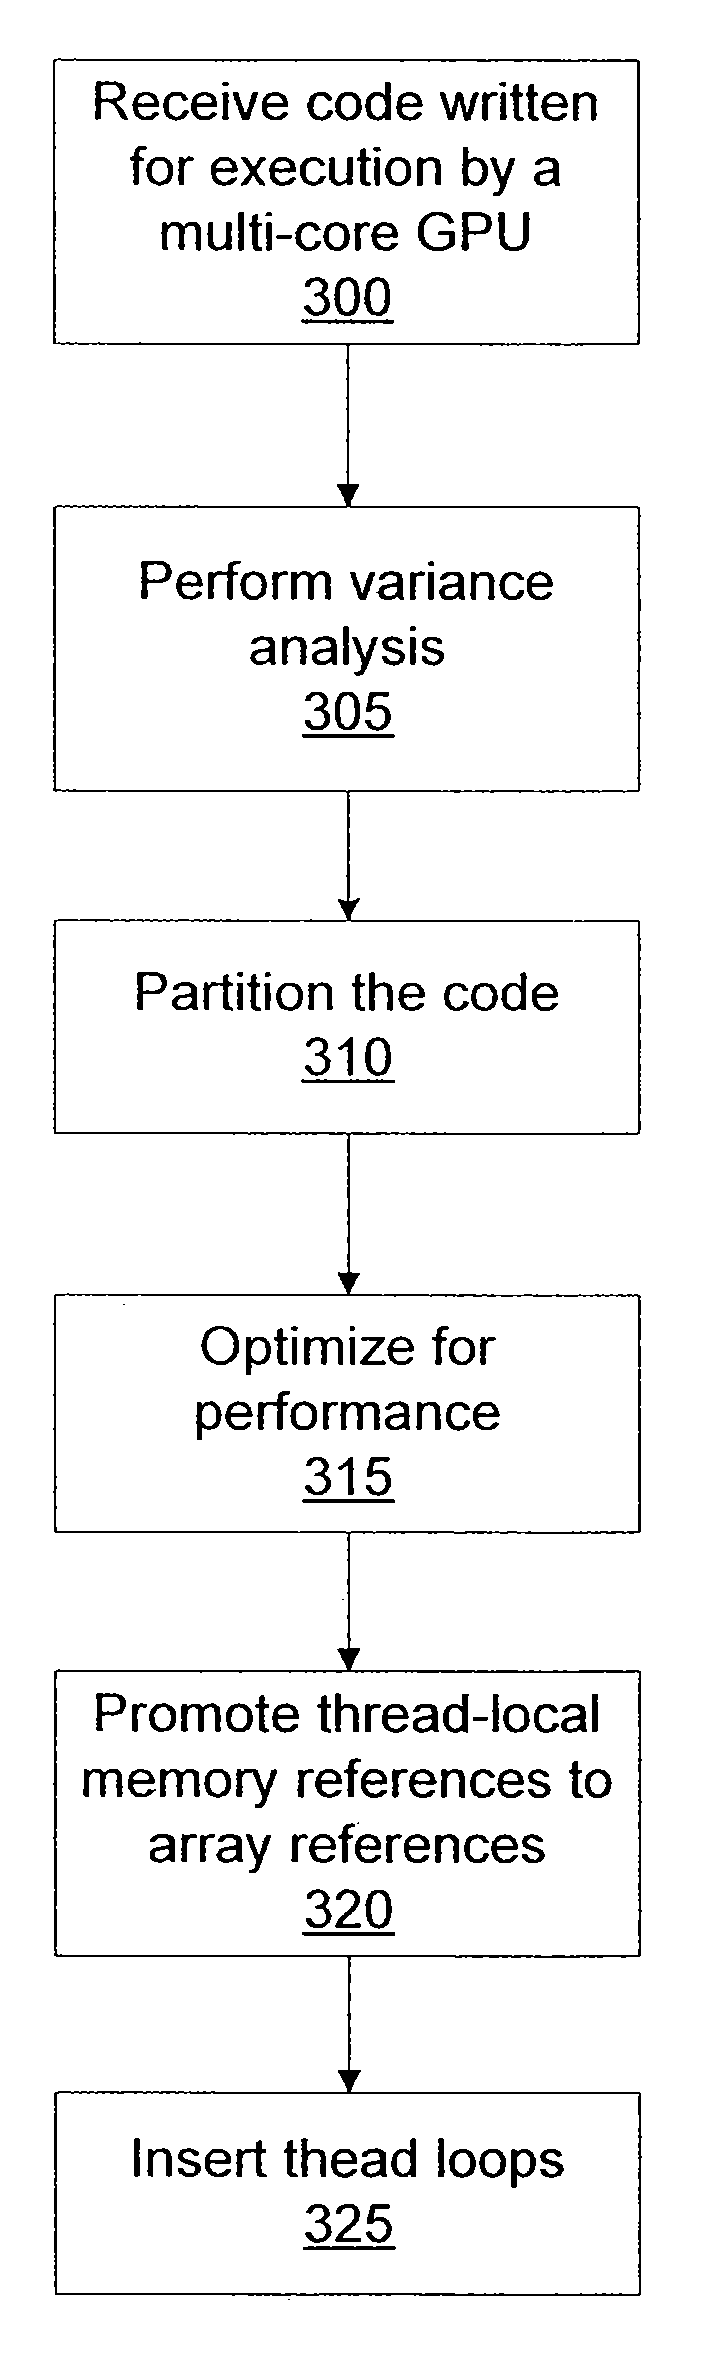 Thread-local memory reference promotion for translating CUDA code for execution by a general purpose processor